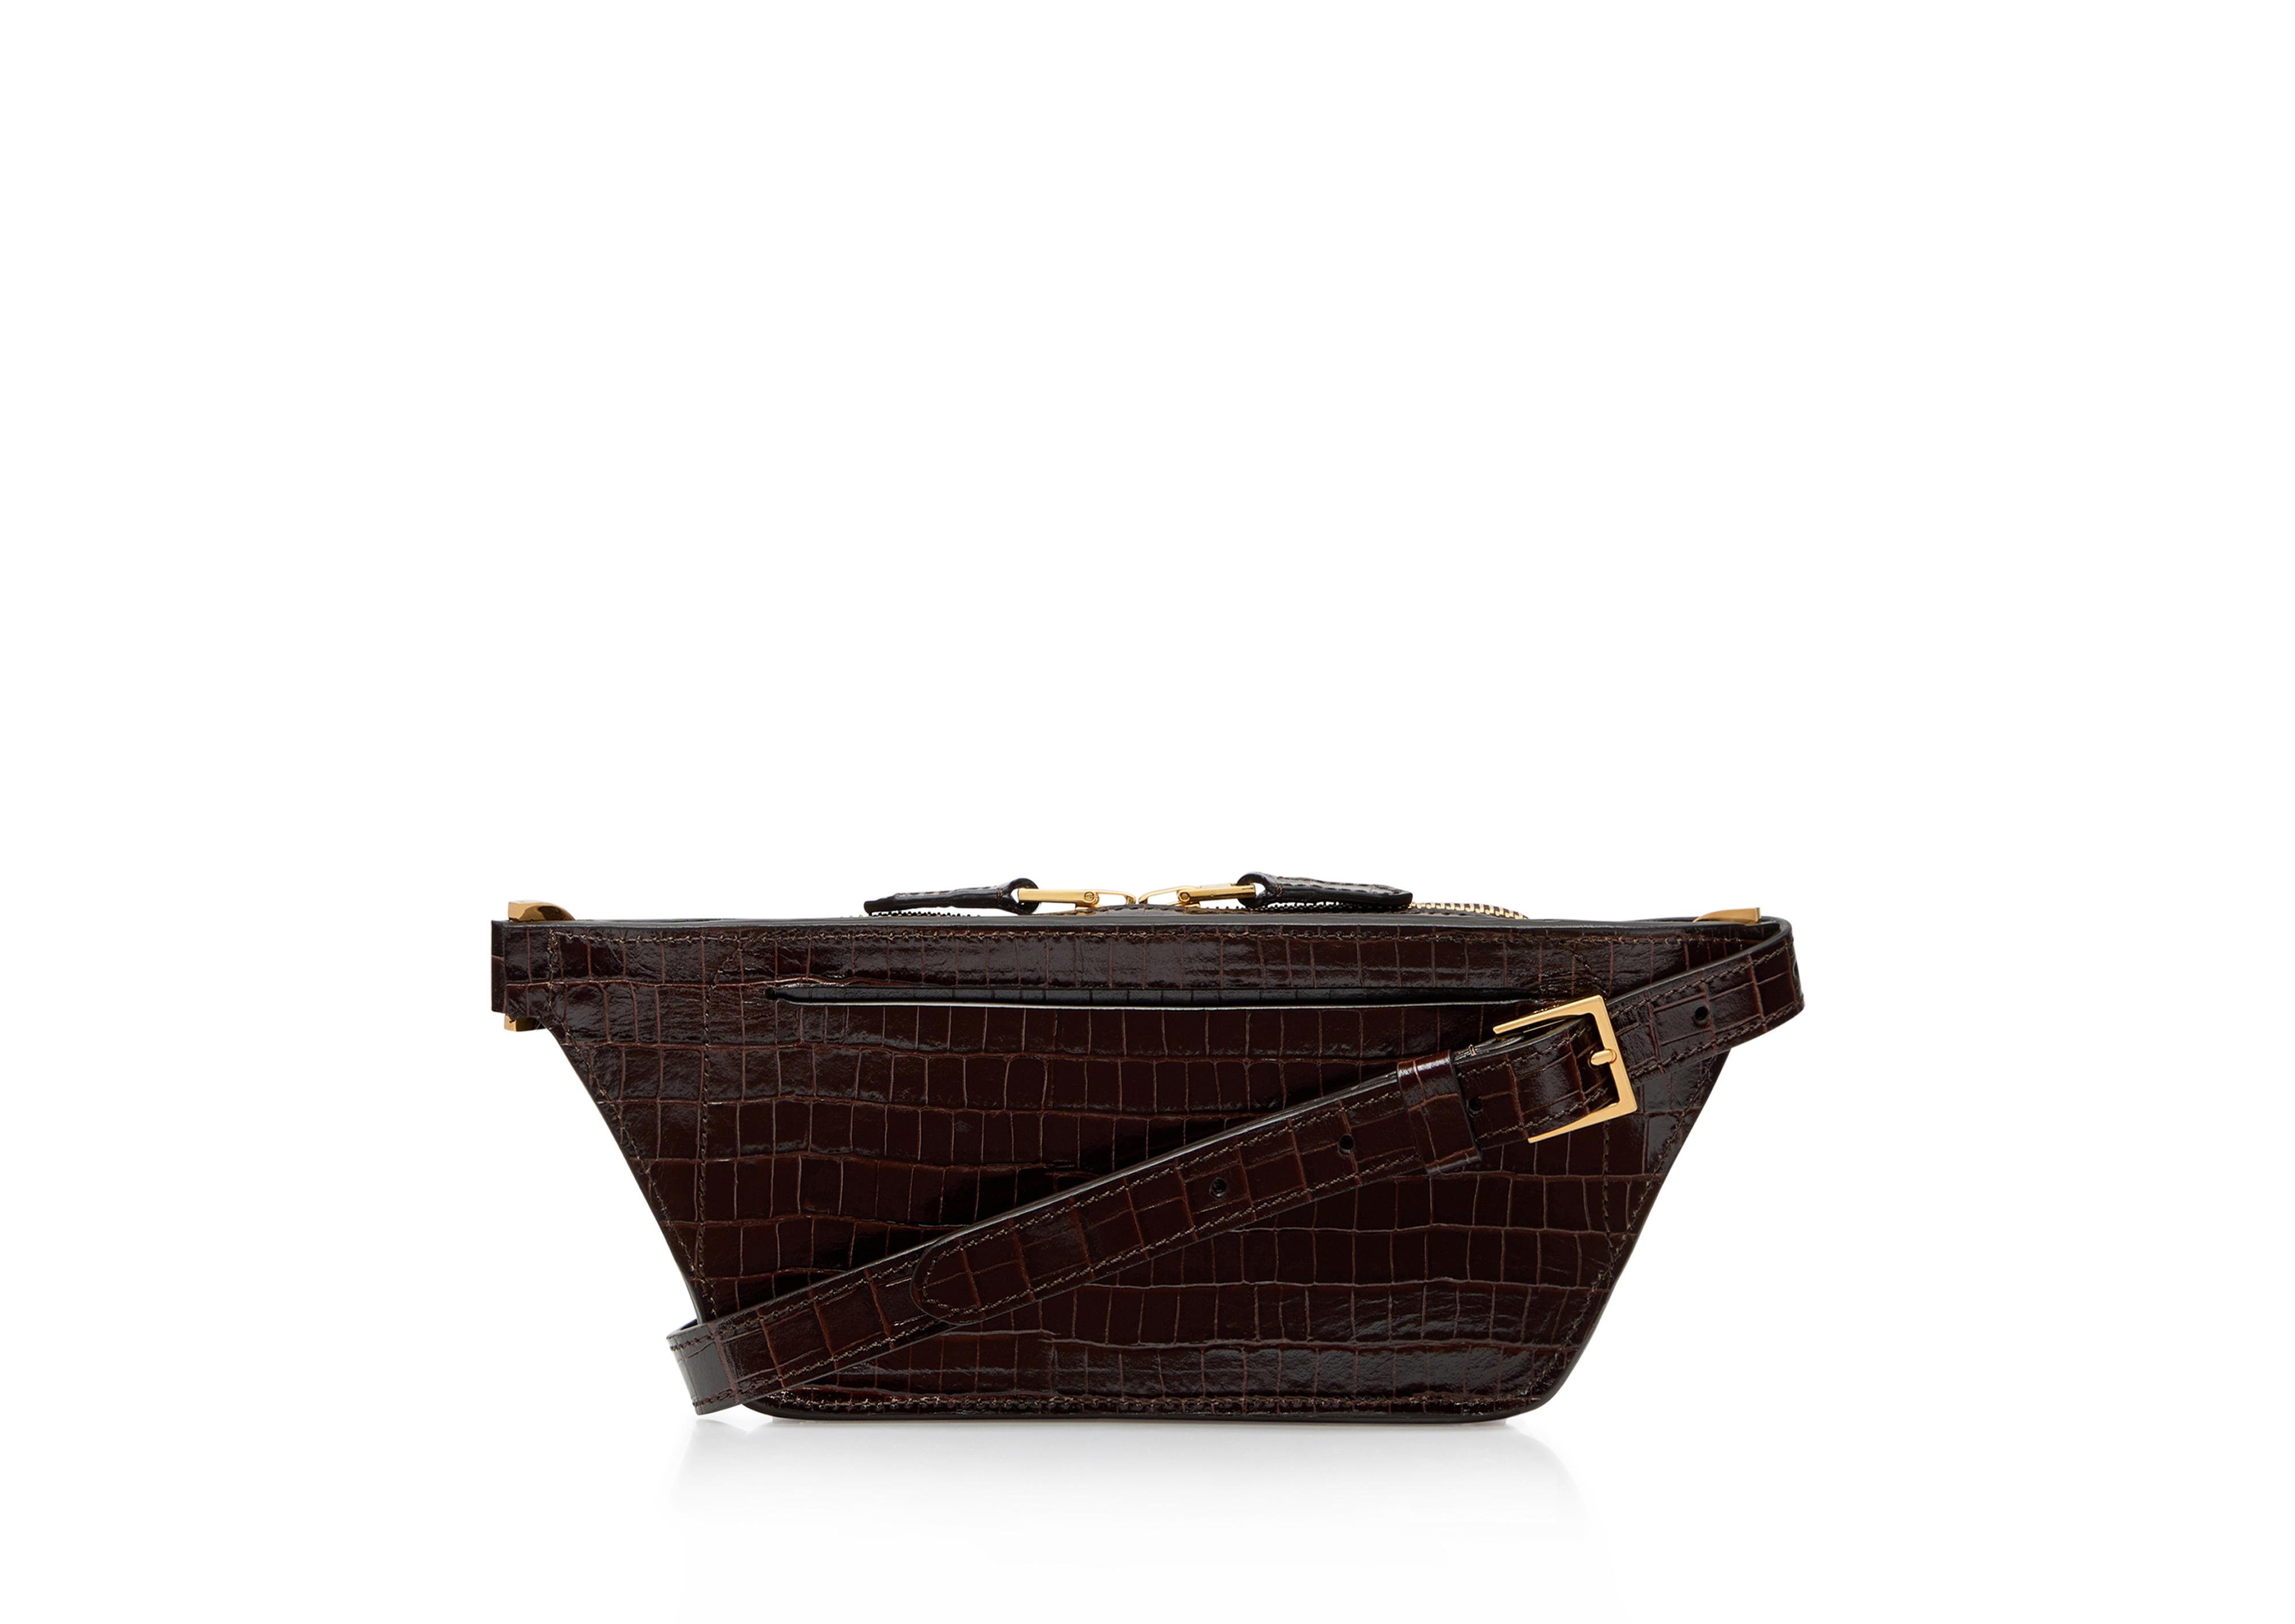 Green Crocodile-effect leather pouch, Tom Ford